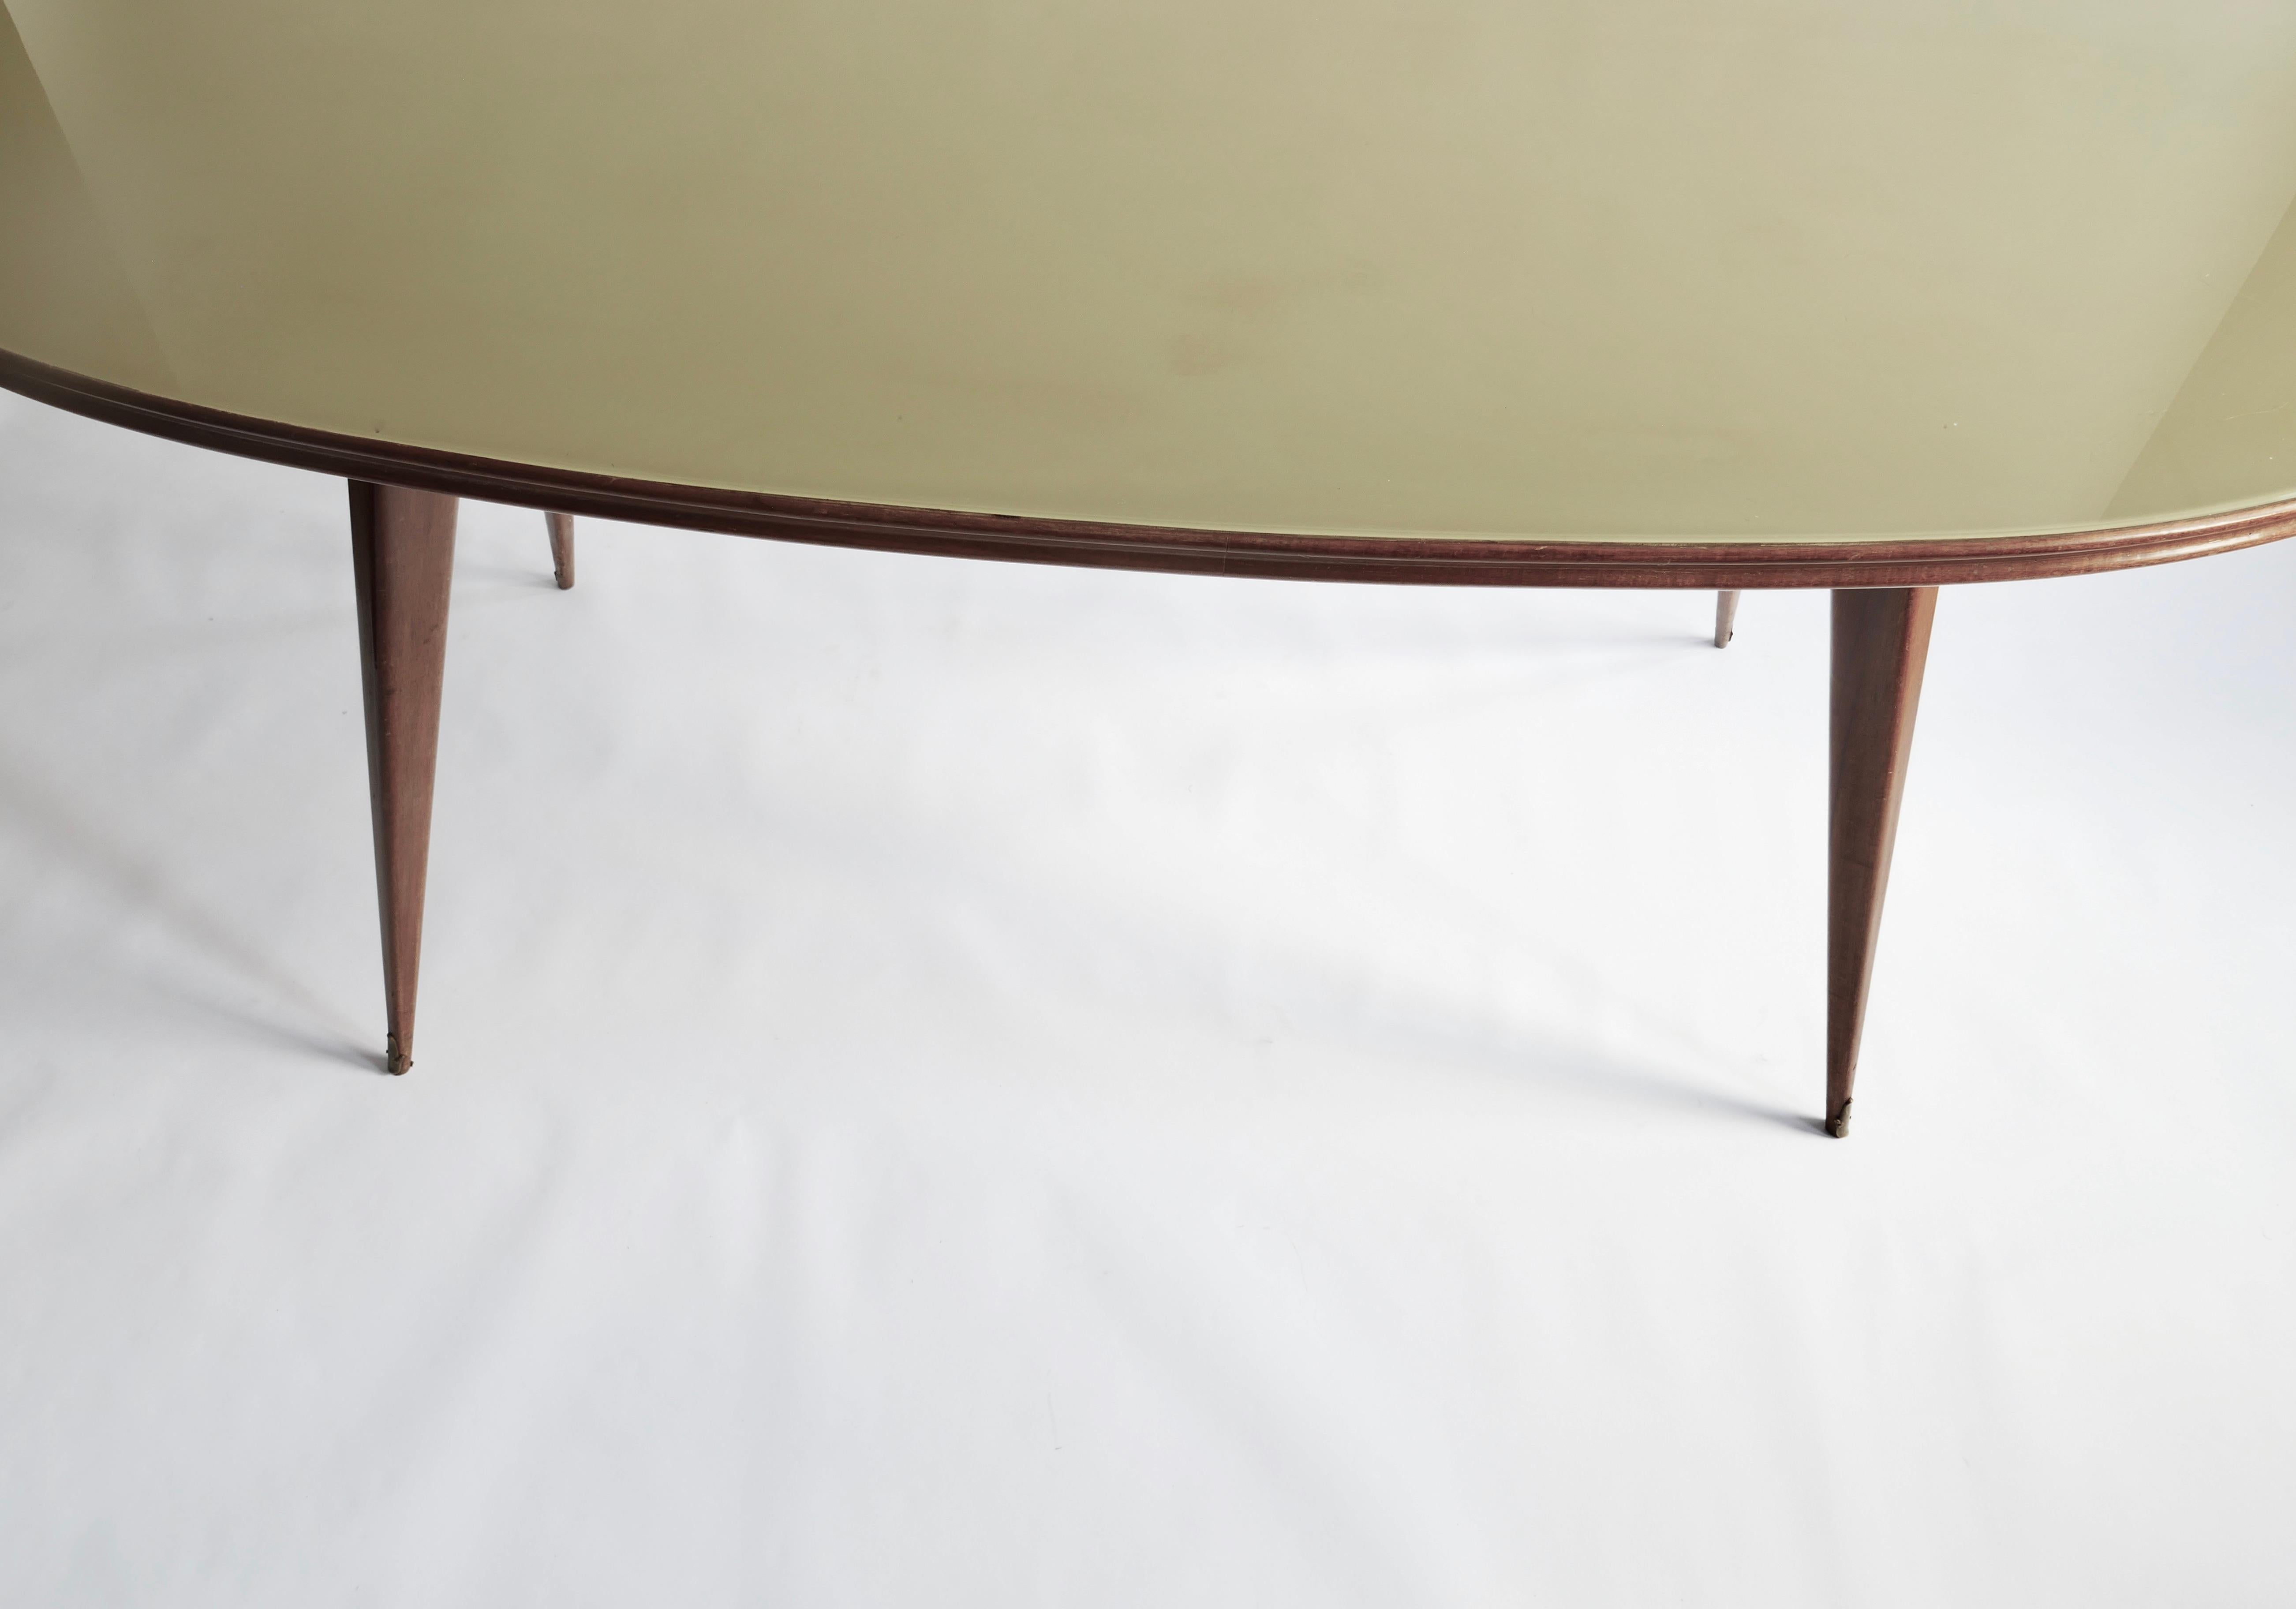 Mid-20th Century Oval Dining/Console Table with Wood Legs and Green Glass Top, Italy, 1960s